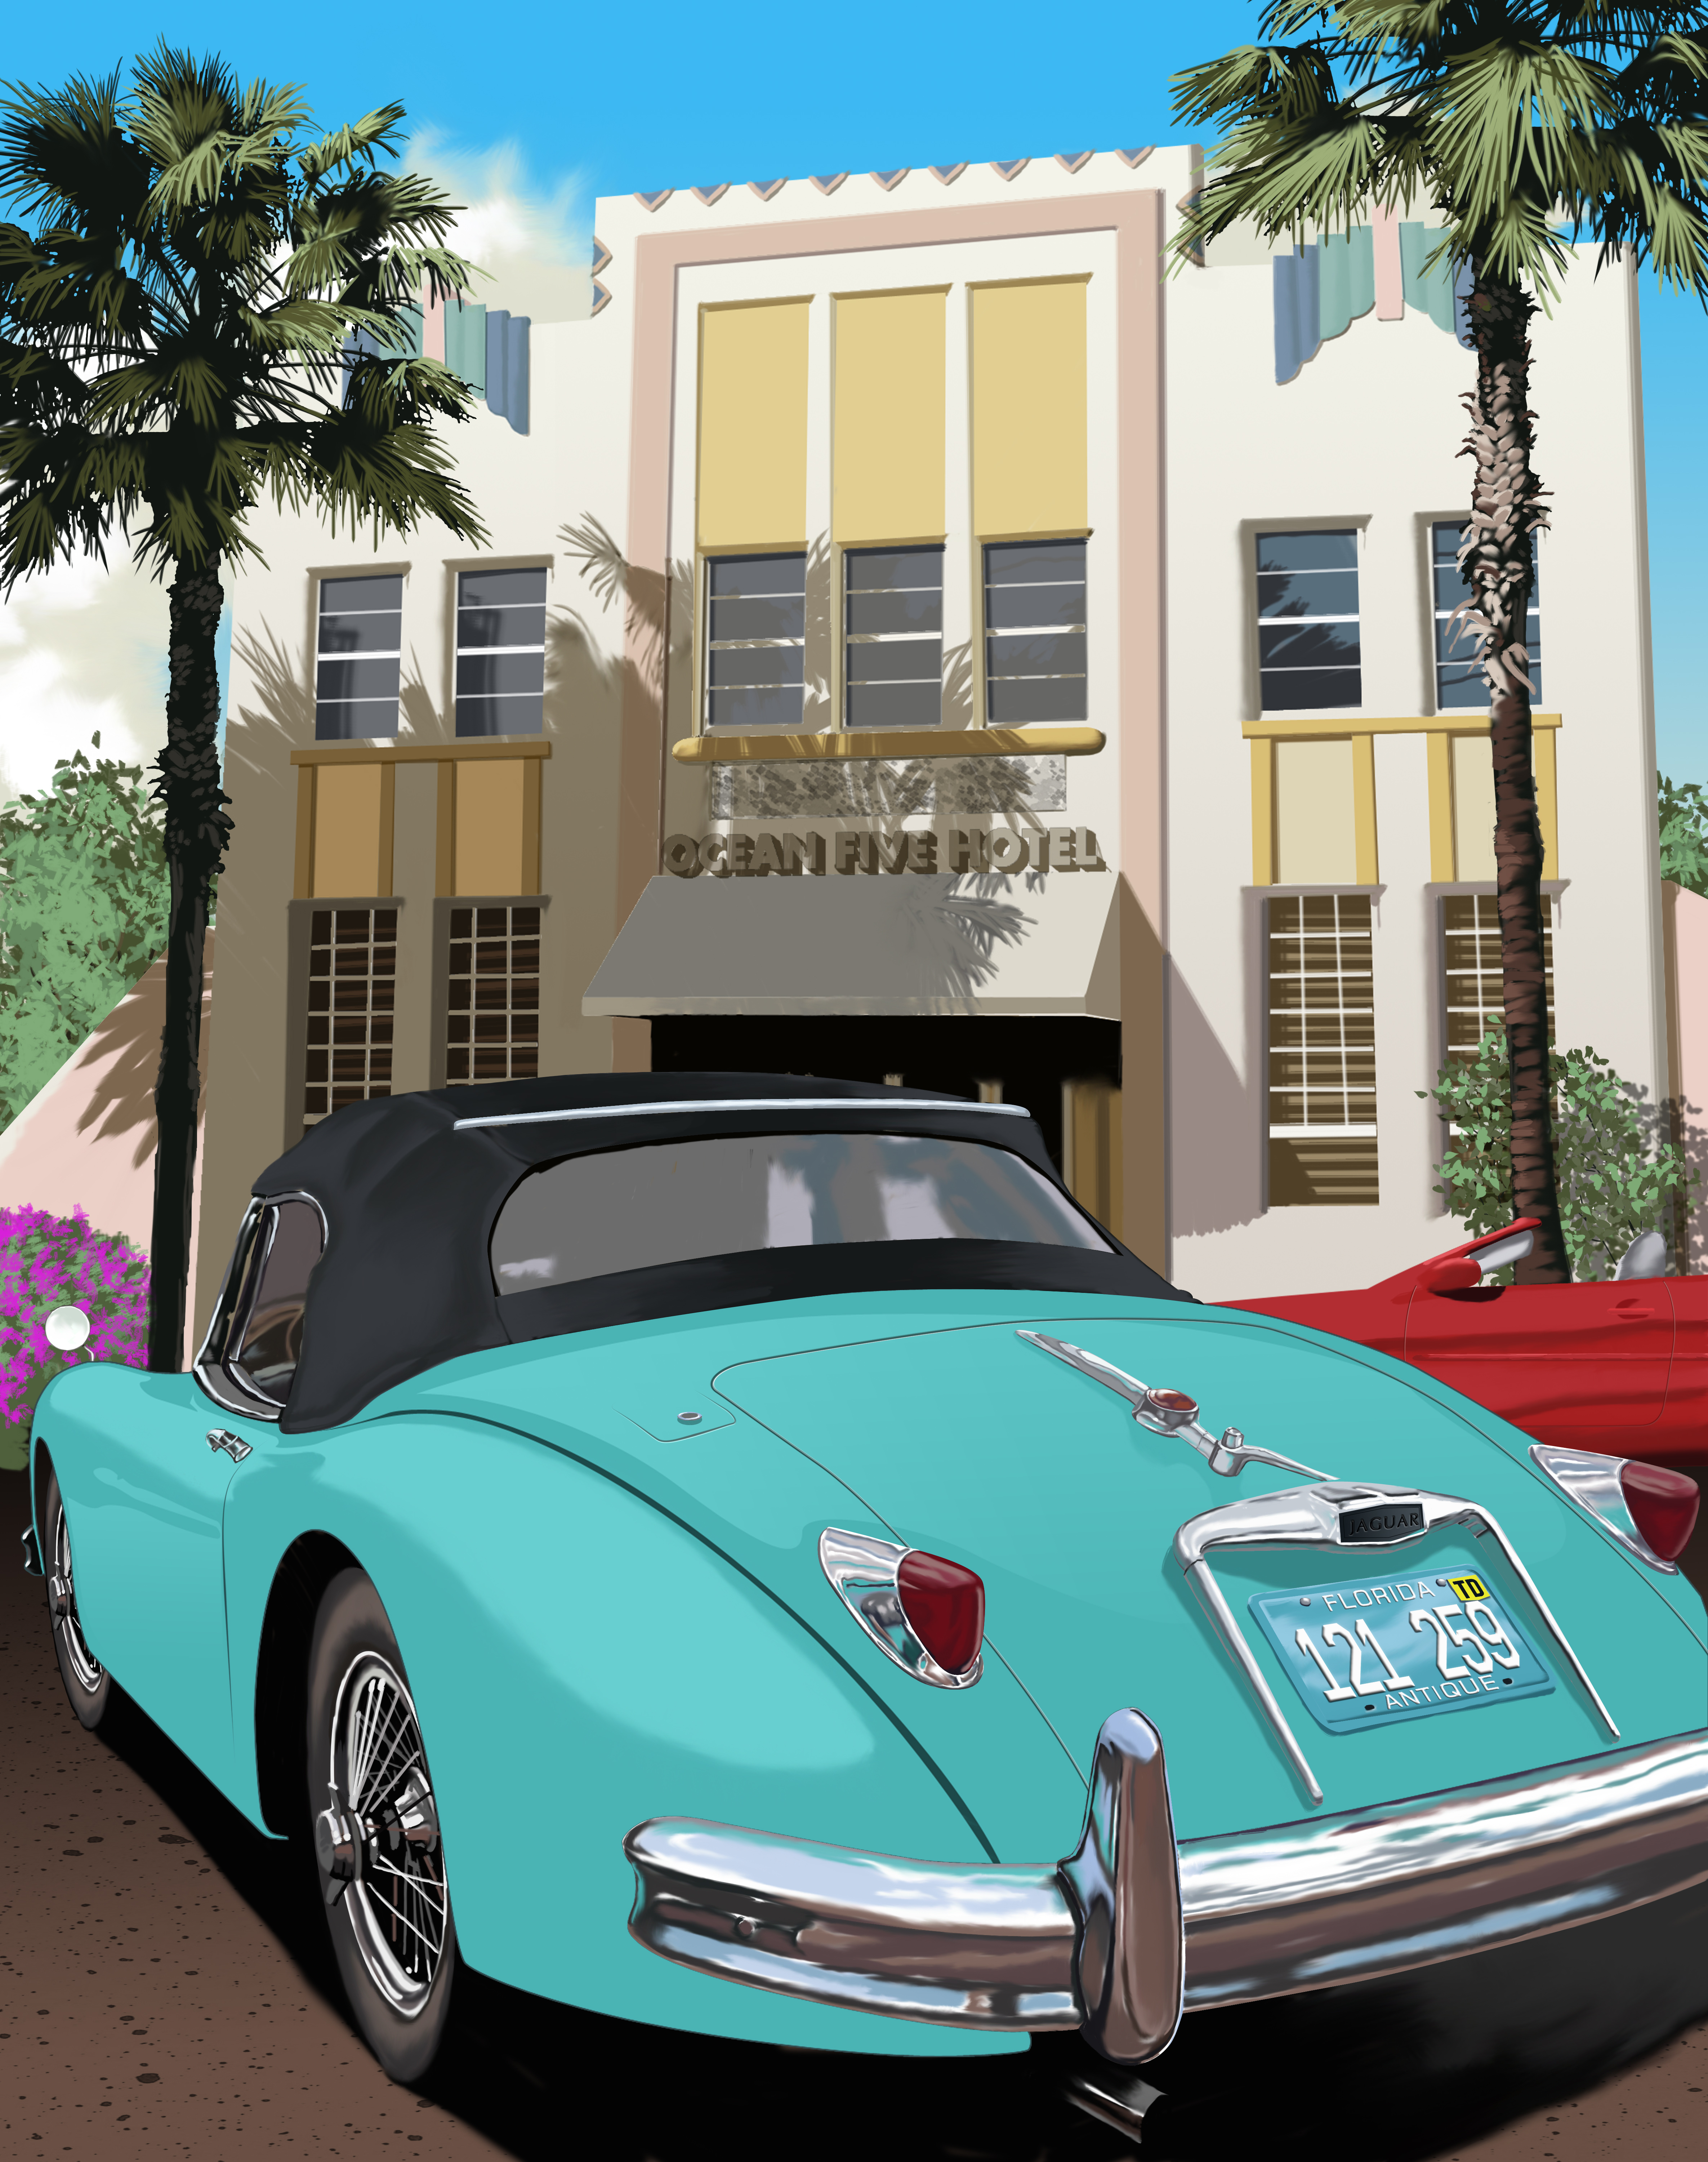 Jaguar in Miami. Classic car in front of a classic hotel. Painted in Photoshop.